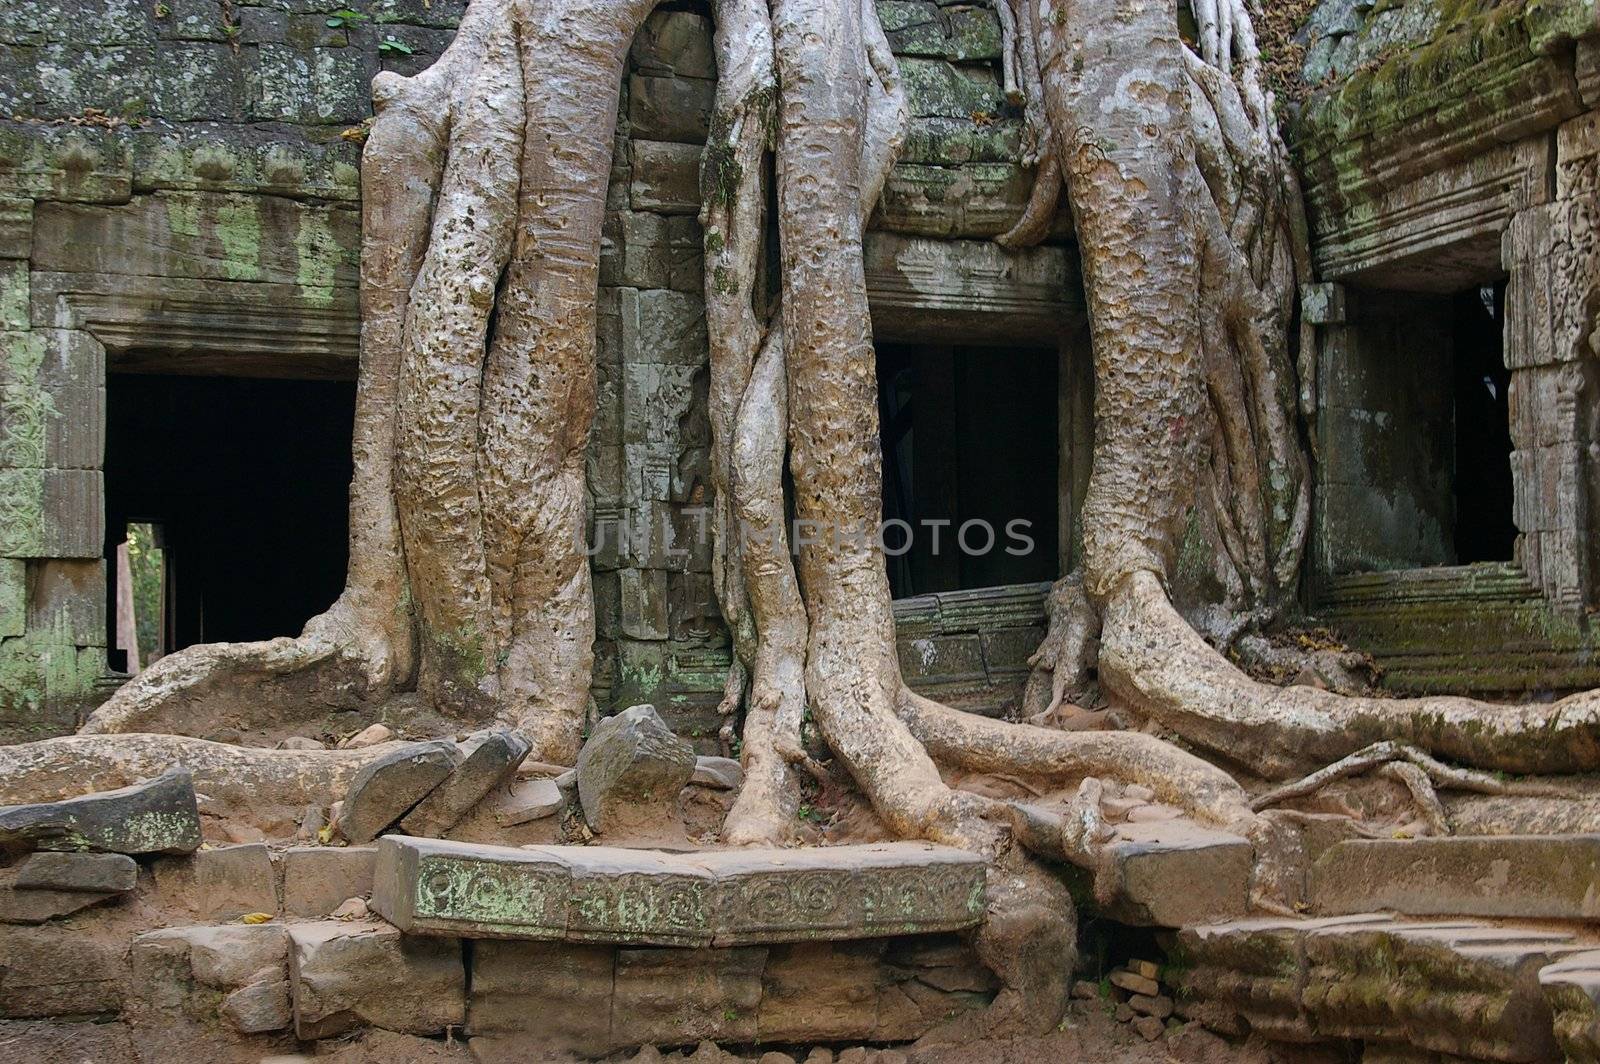 Bayon tree growing on Bayon Temple at Angkor Thom, Angkor, Cambodia. This location has been used in various films, such as The Temple of Doom and Tomb Raider.
